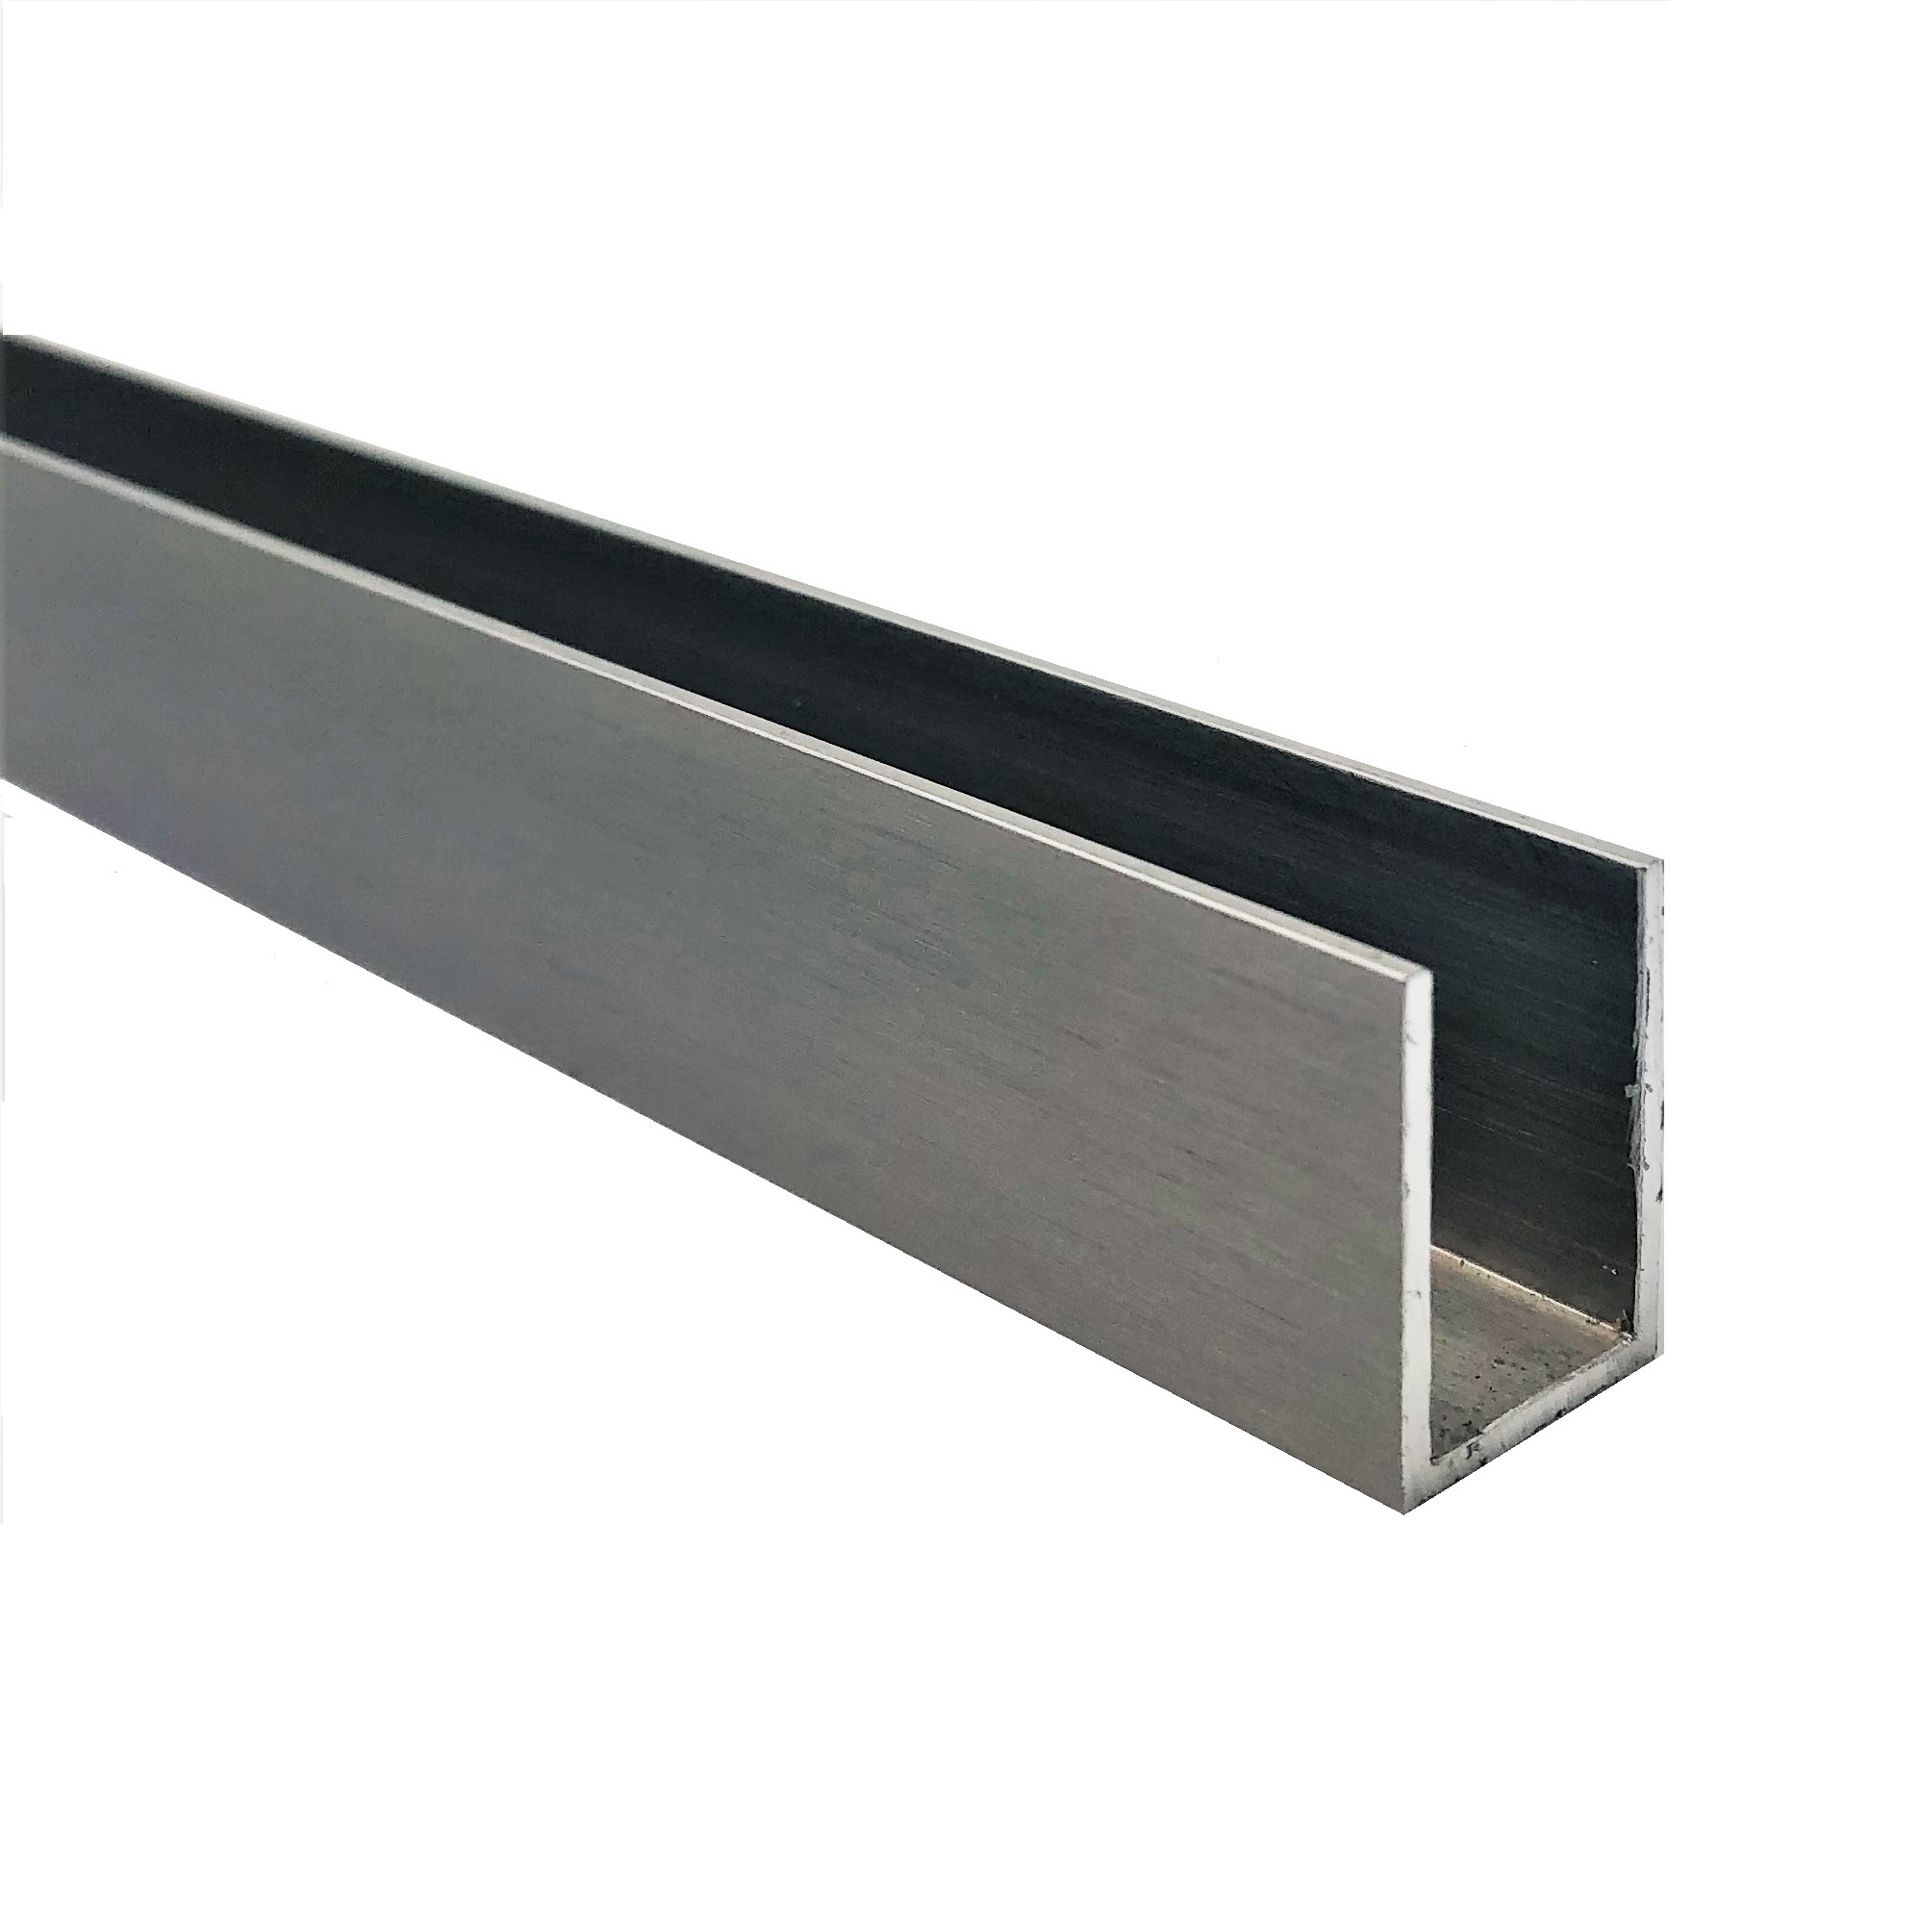 Channel 20x15mm - 2100mm (Brushed Nickel)